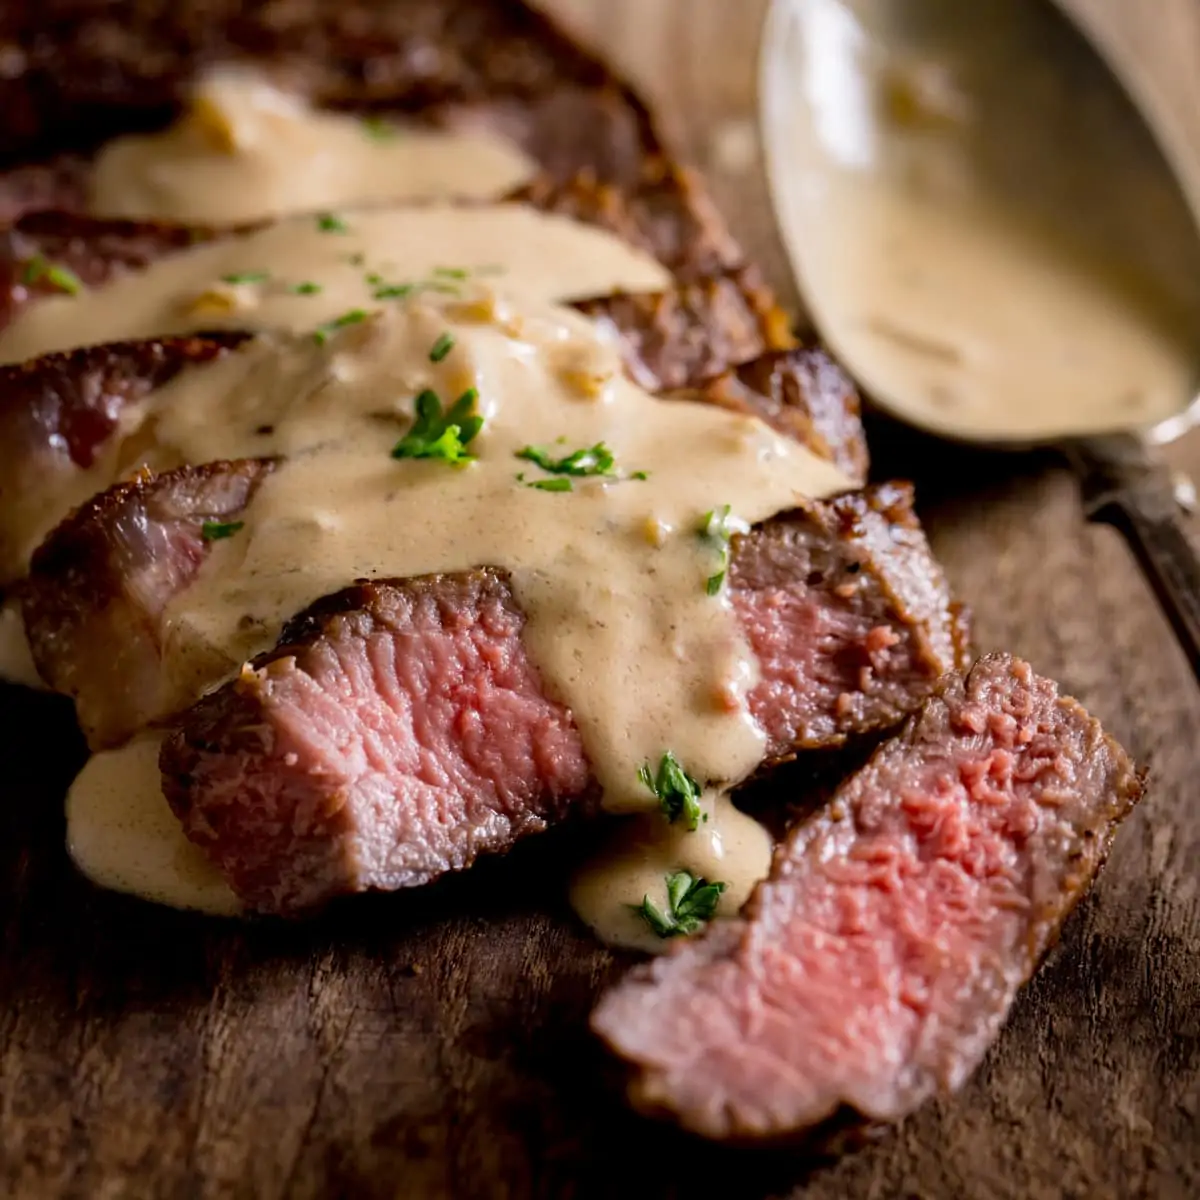 Sliced, cooked steak with diane sauce drizzled over the top on a wooden table with a silver spoon